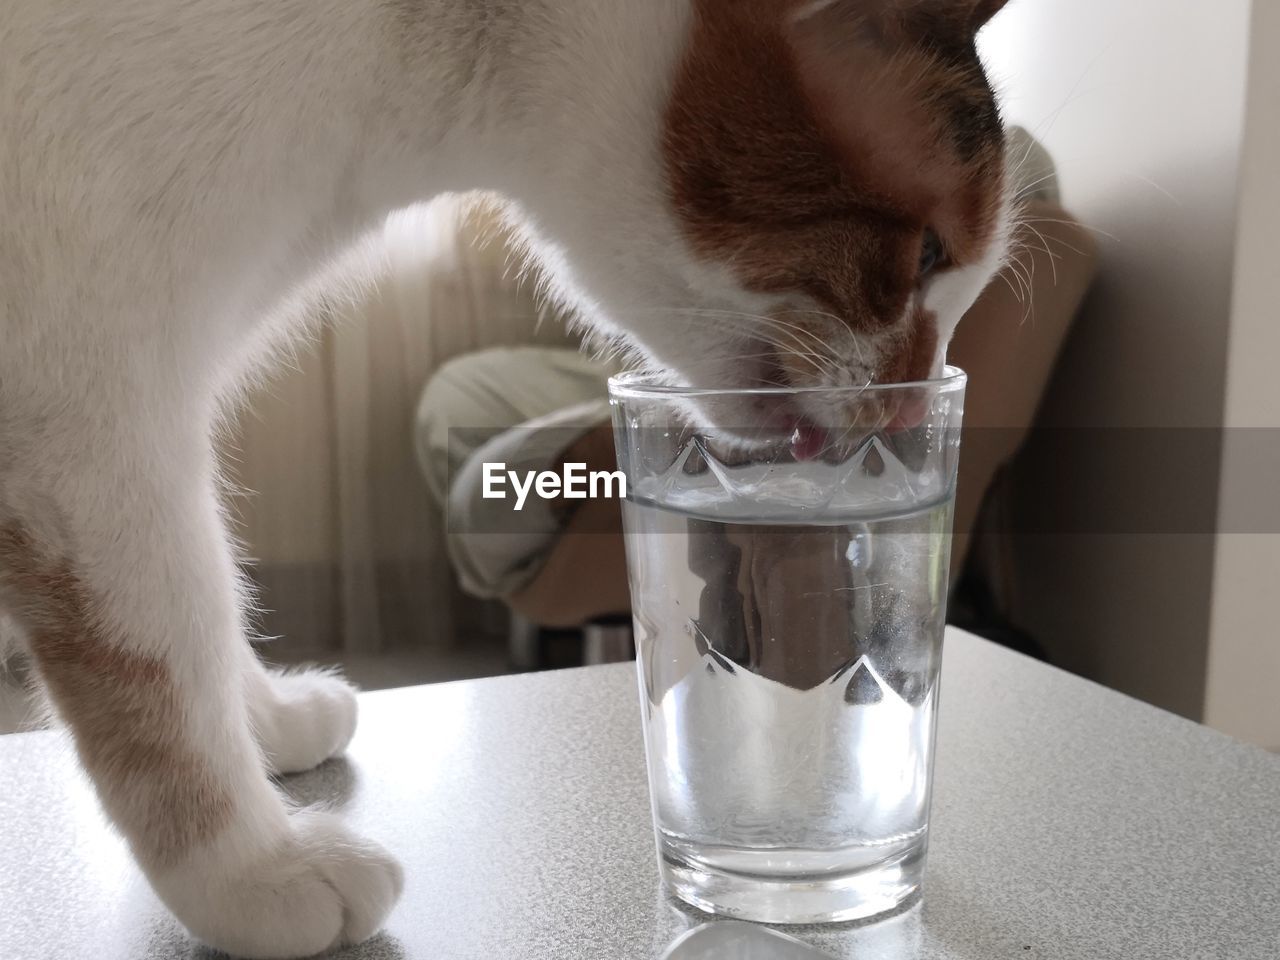 CLOSE-UP OF A CAT DRINKING GLASS WITH A DRINK